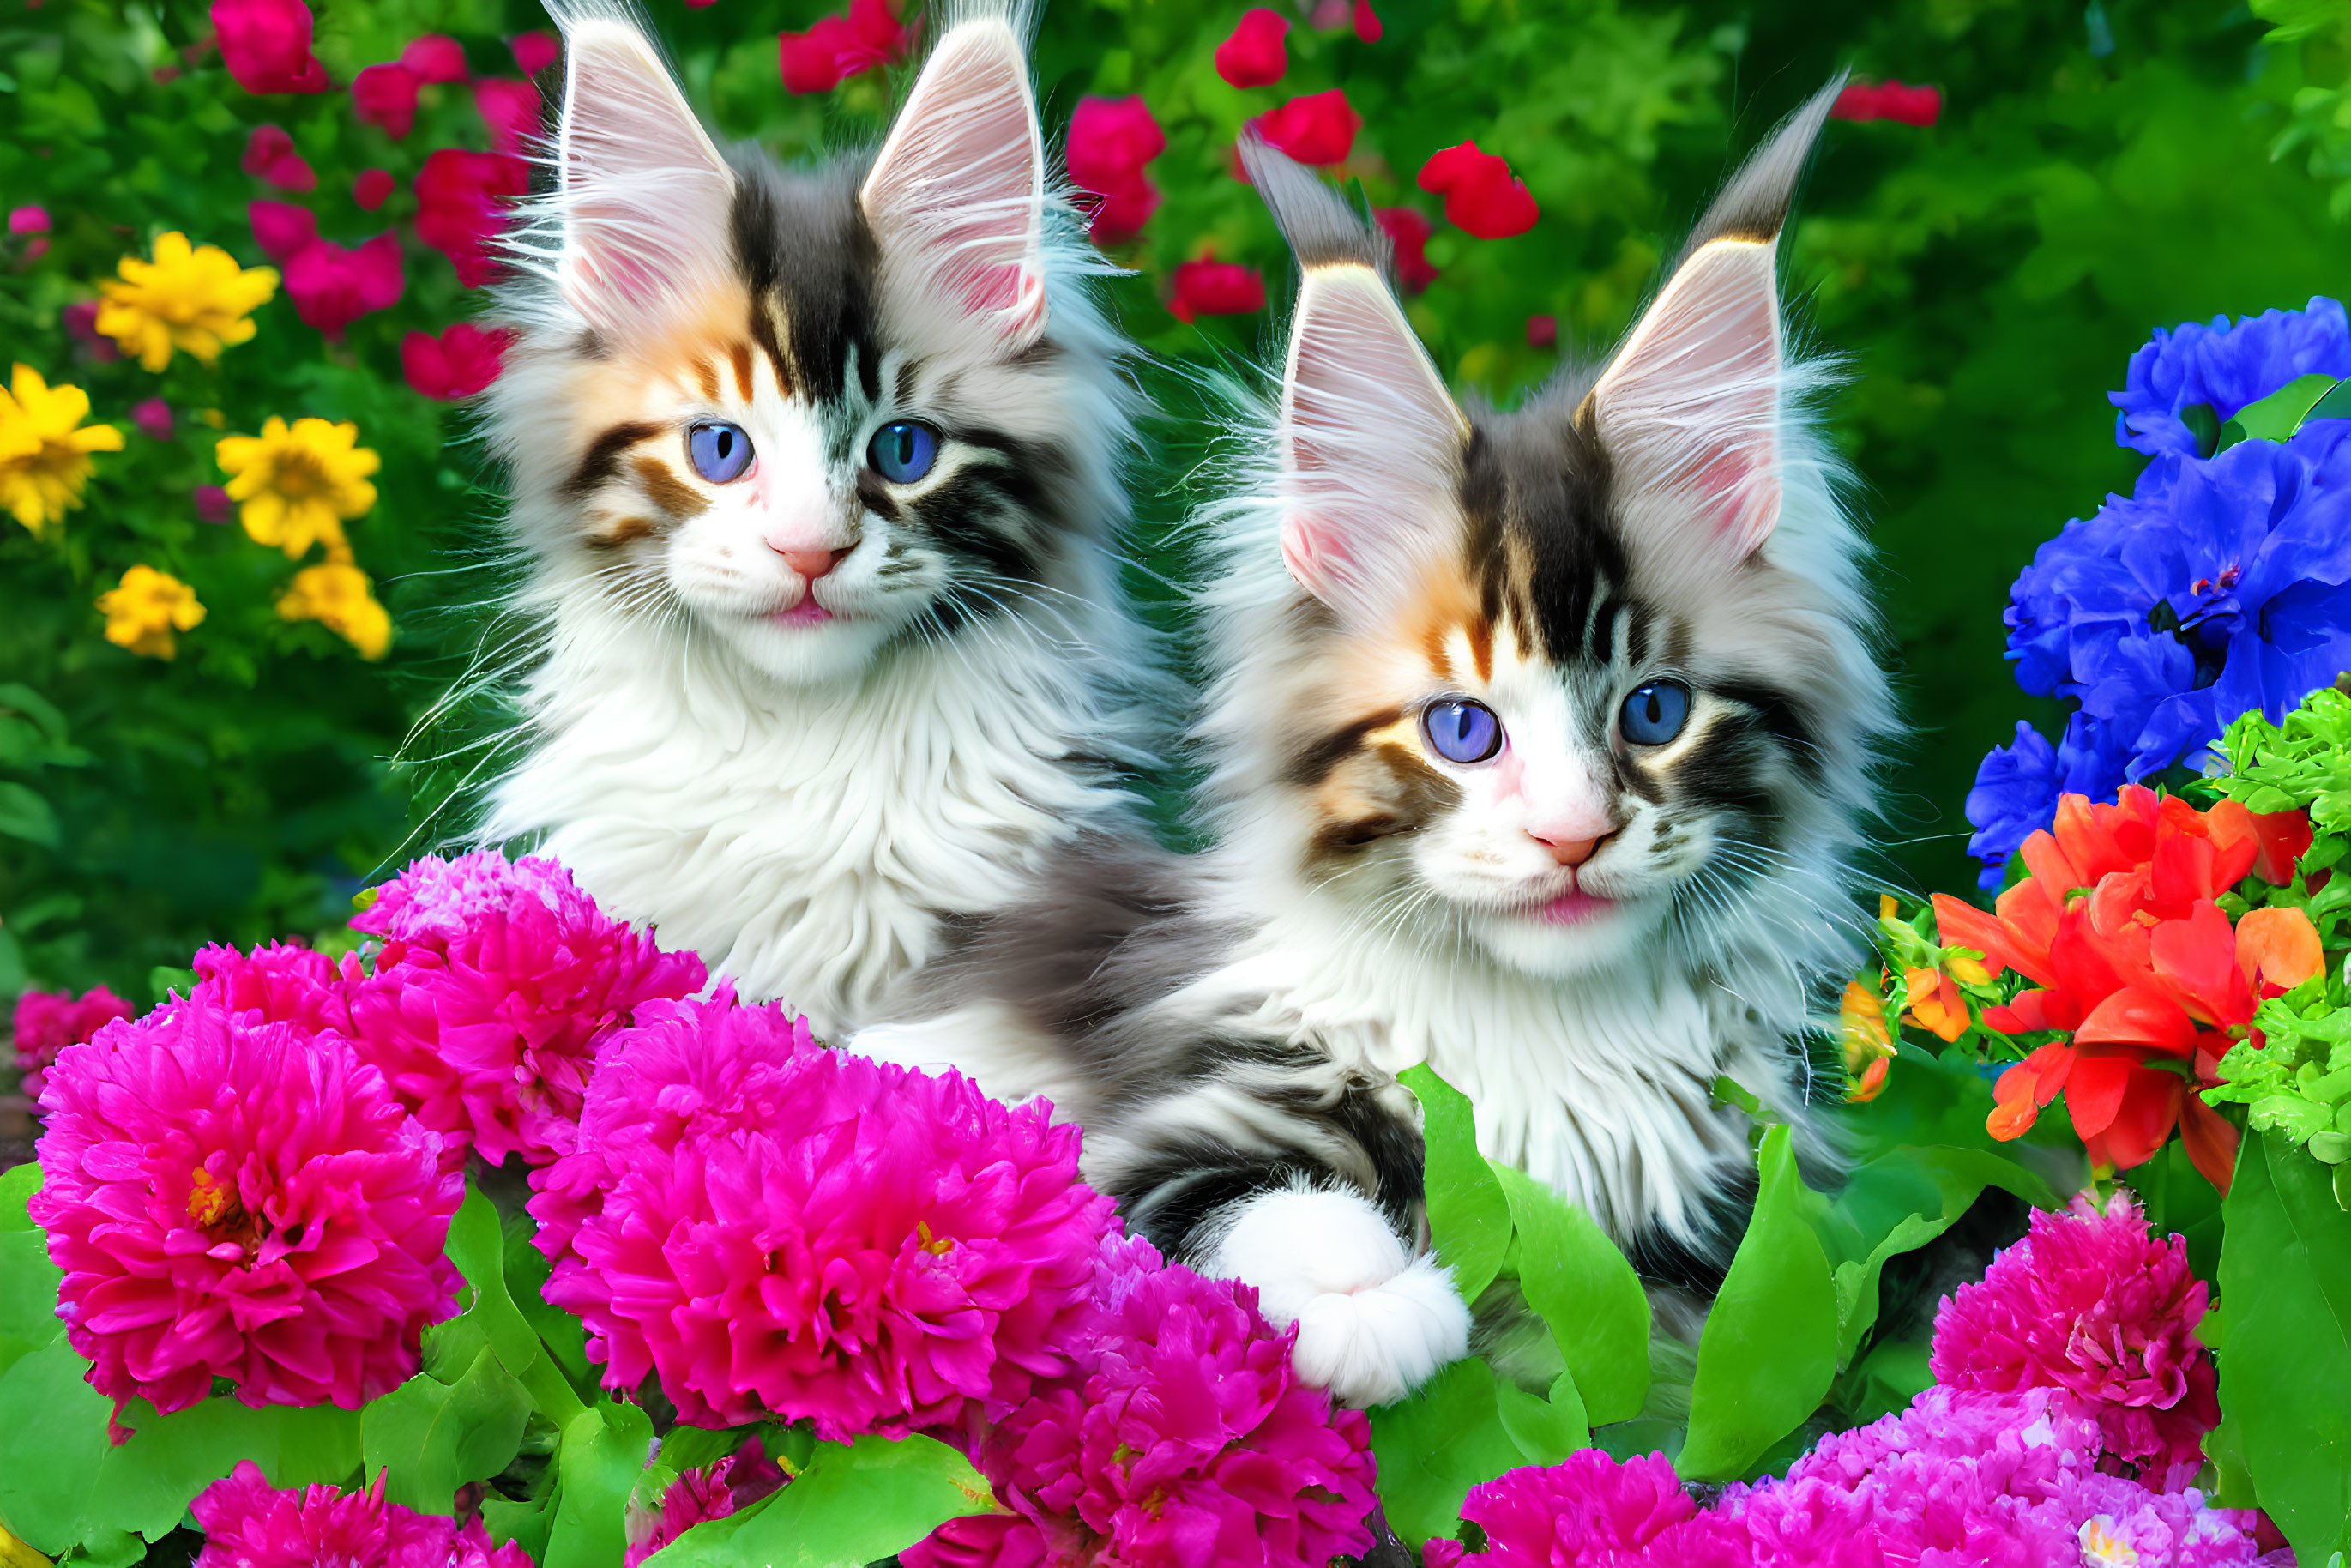 Fluffy Kittens with Blue Eyes Among Colorful Flowers